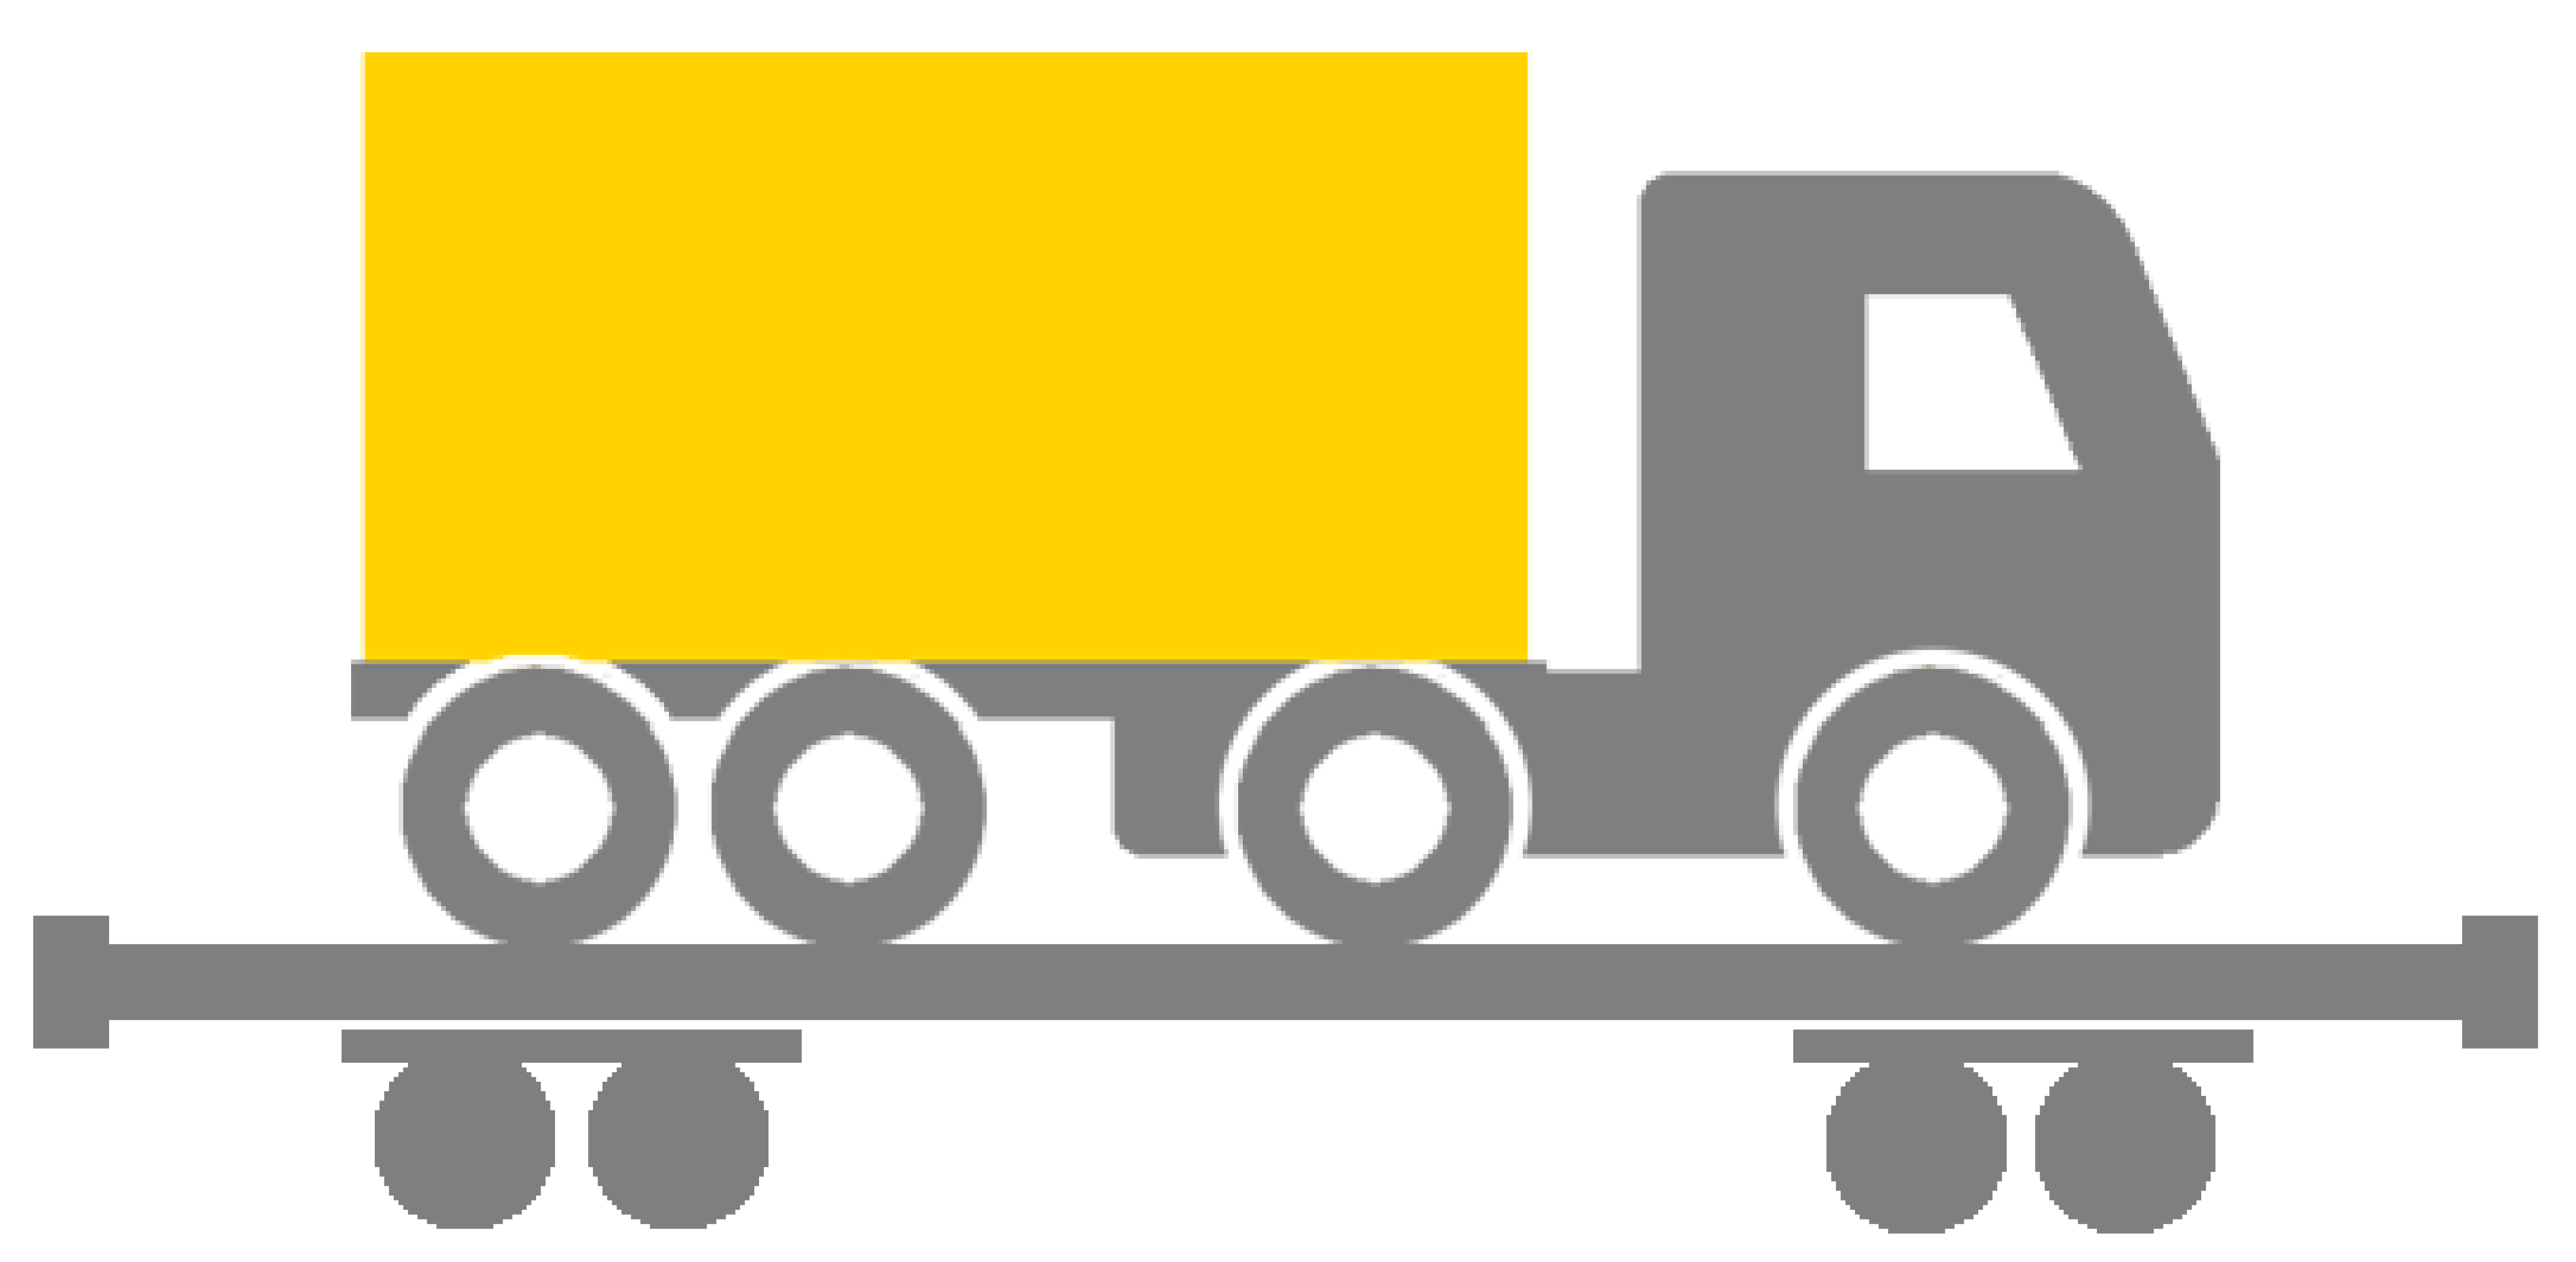 An Icon of a truck with a yellow container standing on a rail waggon.